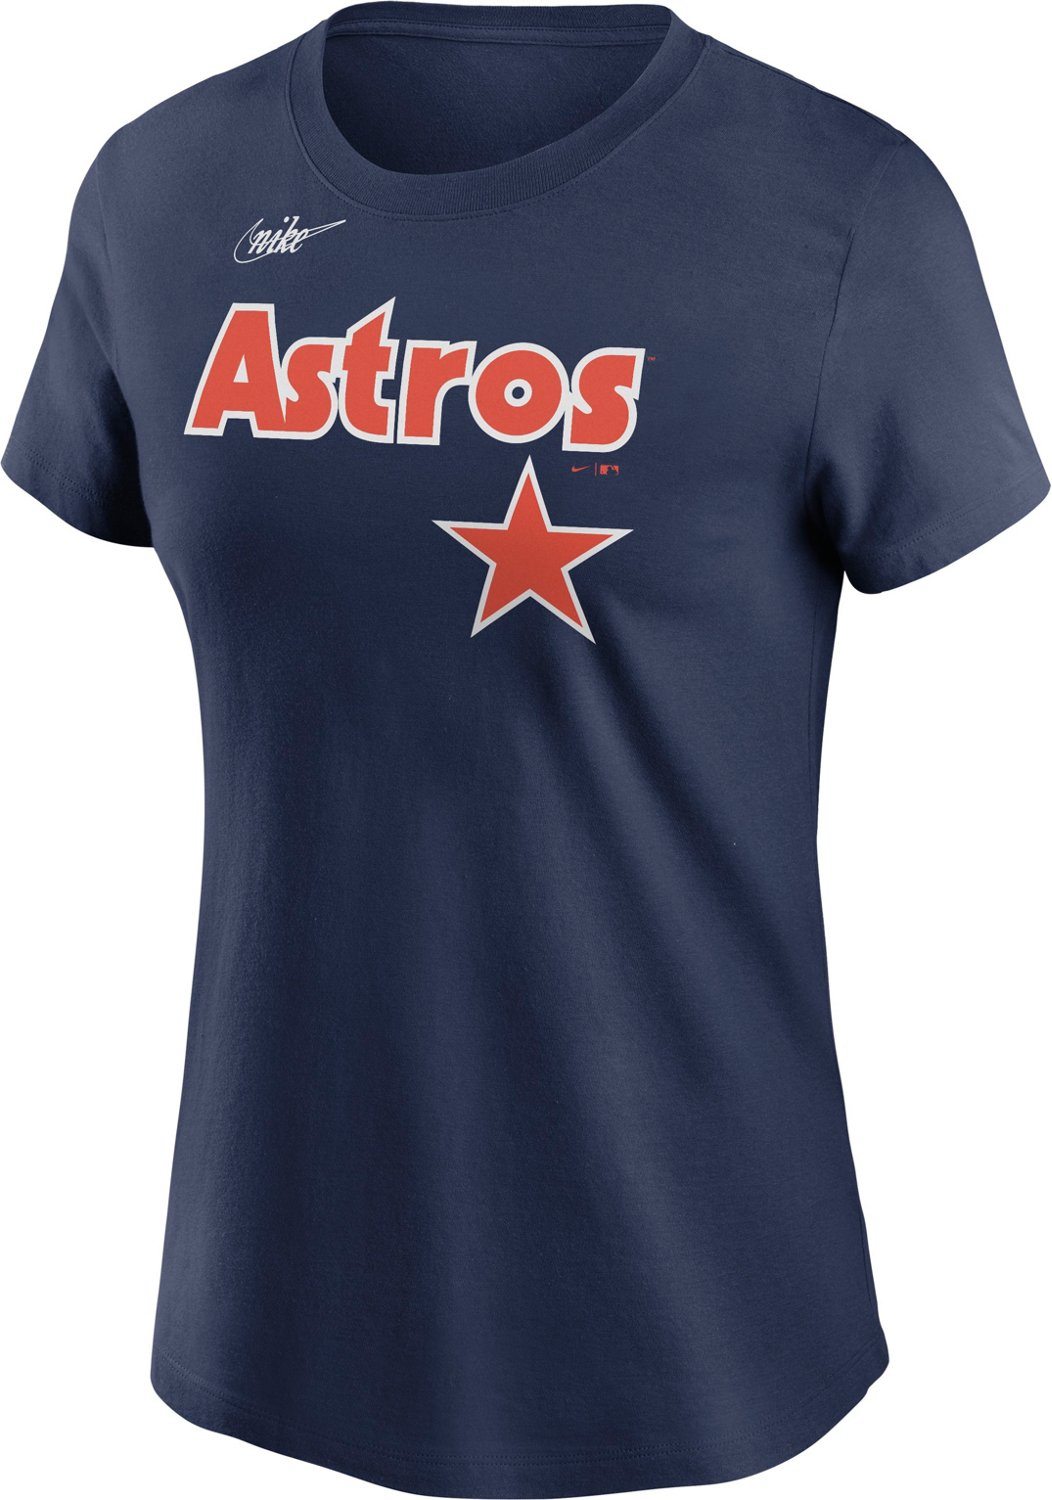 Nike Women's Houston Astros Cooperstown Graphic T-shirt